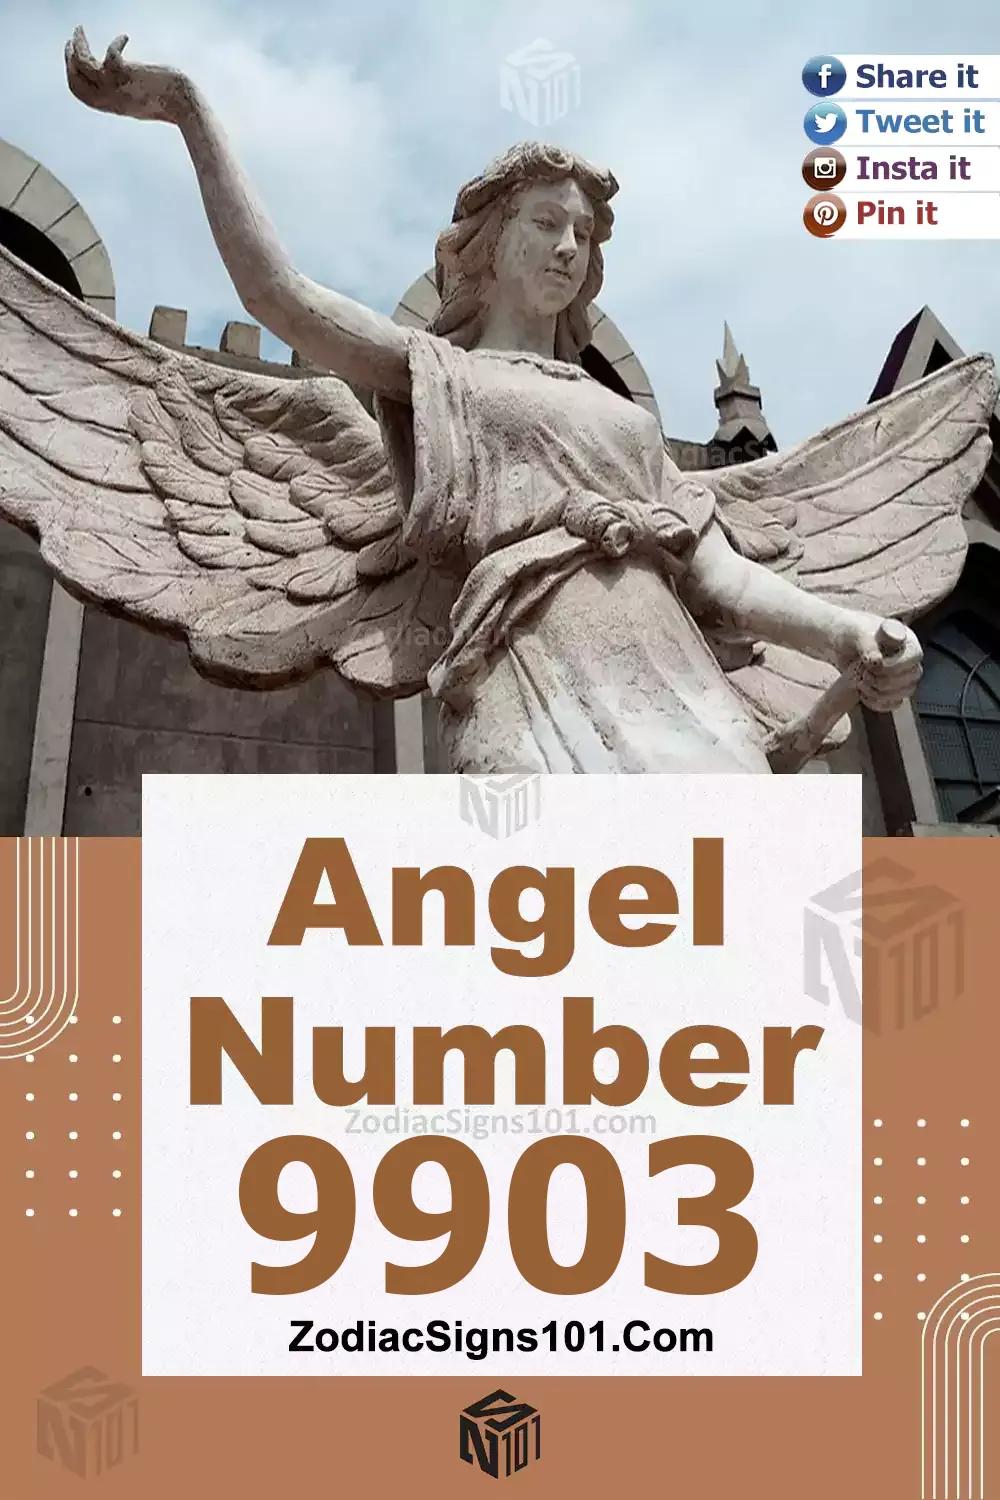 9903 Angel Number Meaning